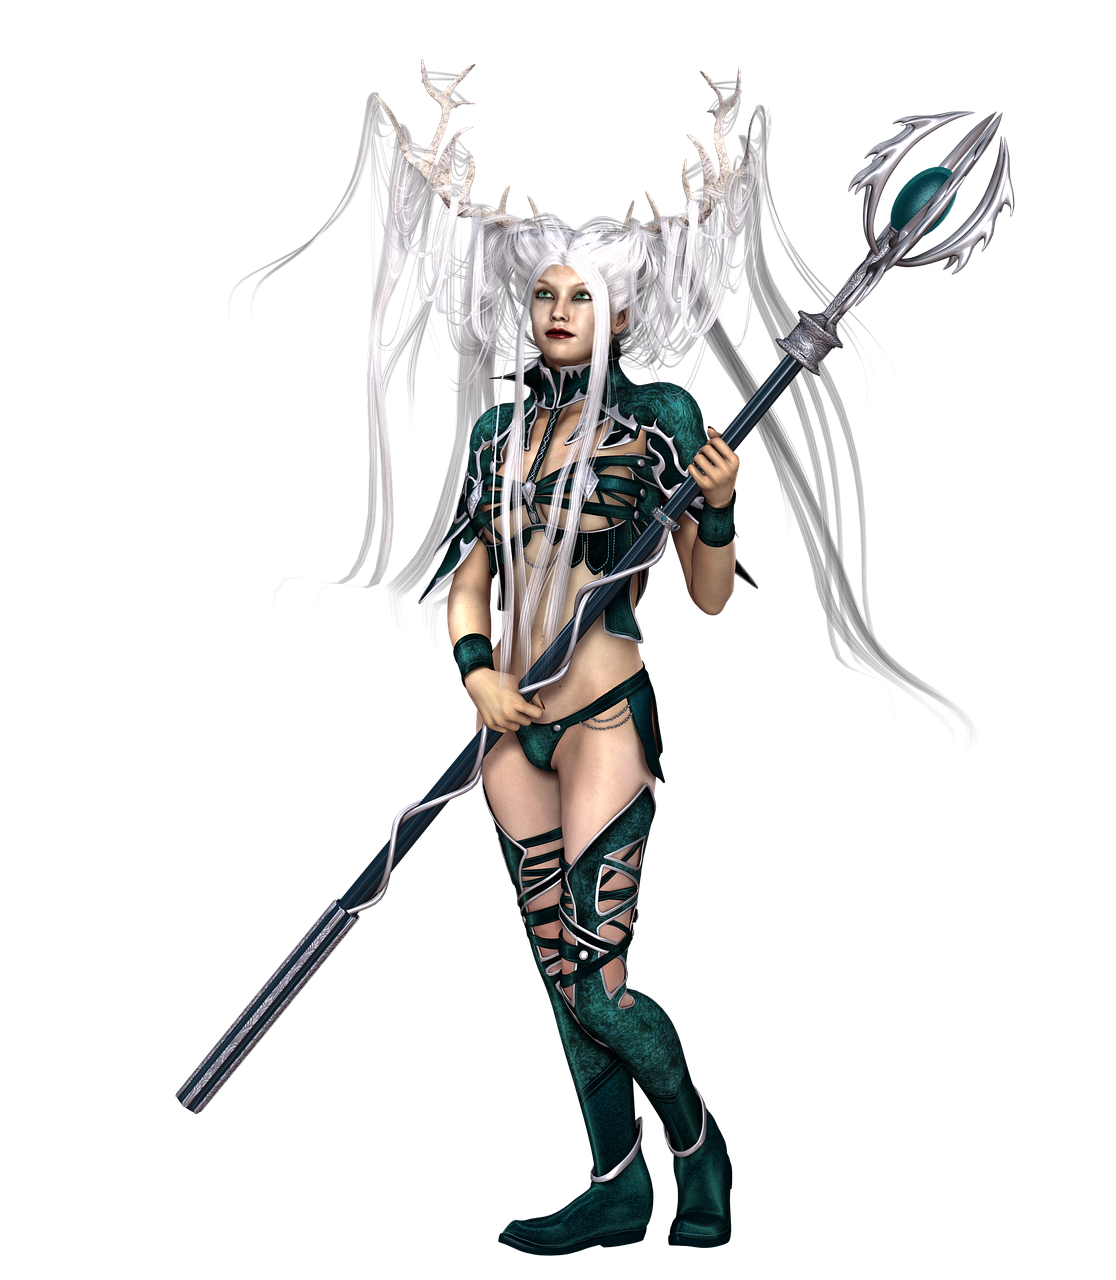 a woman with white hair holding a sword, by senior character artist, zbrush central contest winner, fantasy art, wearing a crown made of antlers, silver and emerald breastplate, high quality fantasy stock photo, fantasy outfit